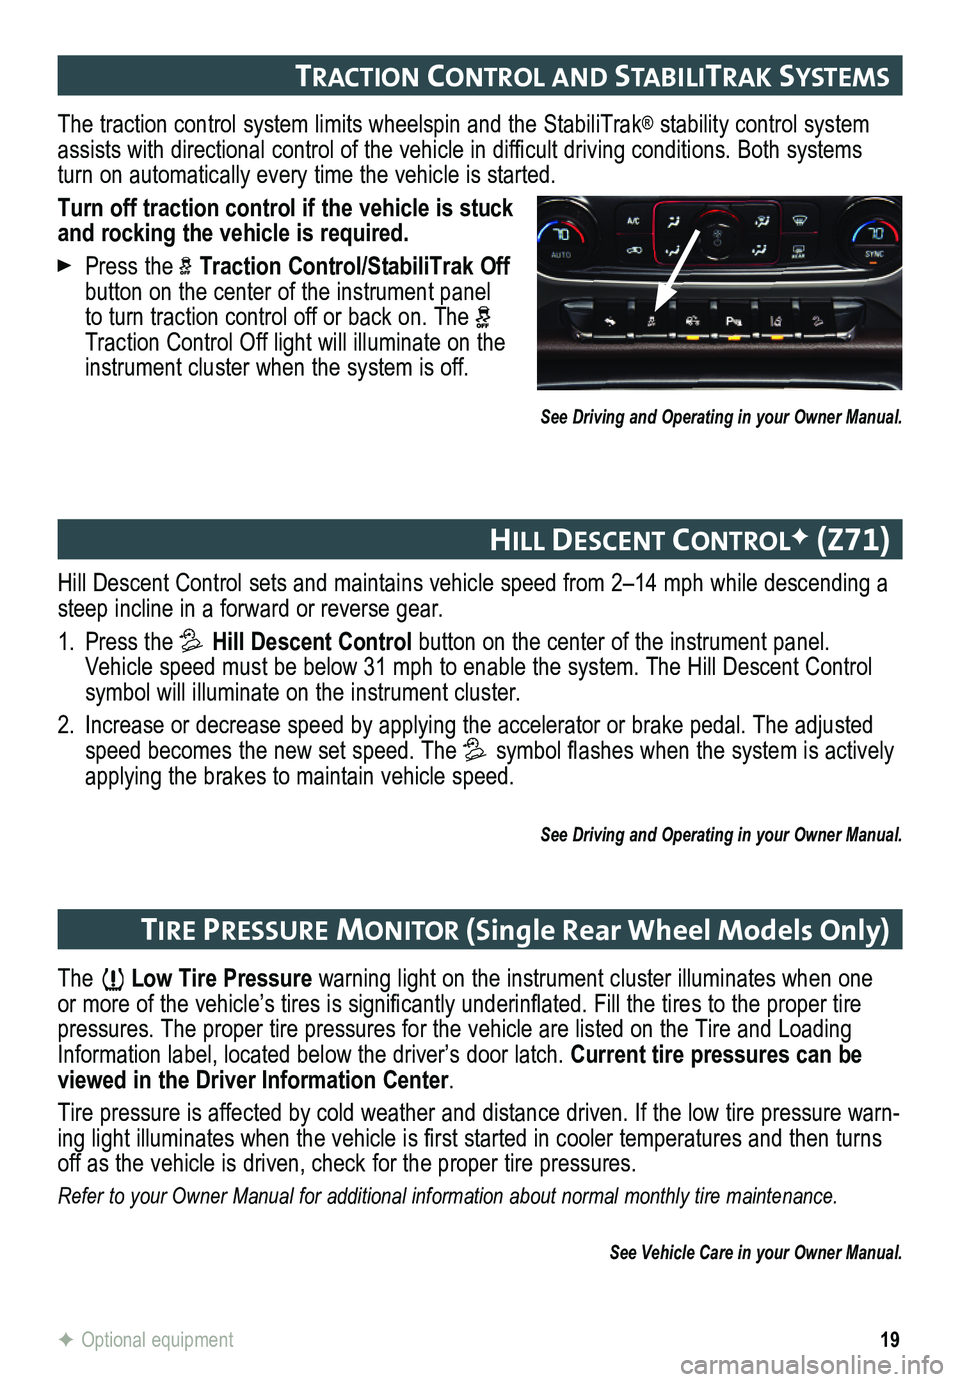 GMC SIERRA HD 2015  Get To Know Guide 19
Hill Descent Control sets and maintains vehicle speed from 2–14 mph while descending a steep incline in a forward or reverse gear.
1. Press the  Hill Descent Control button on the center of the i